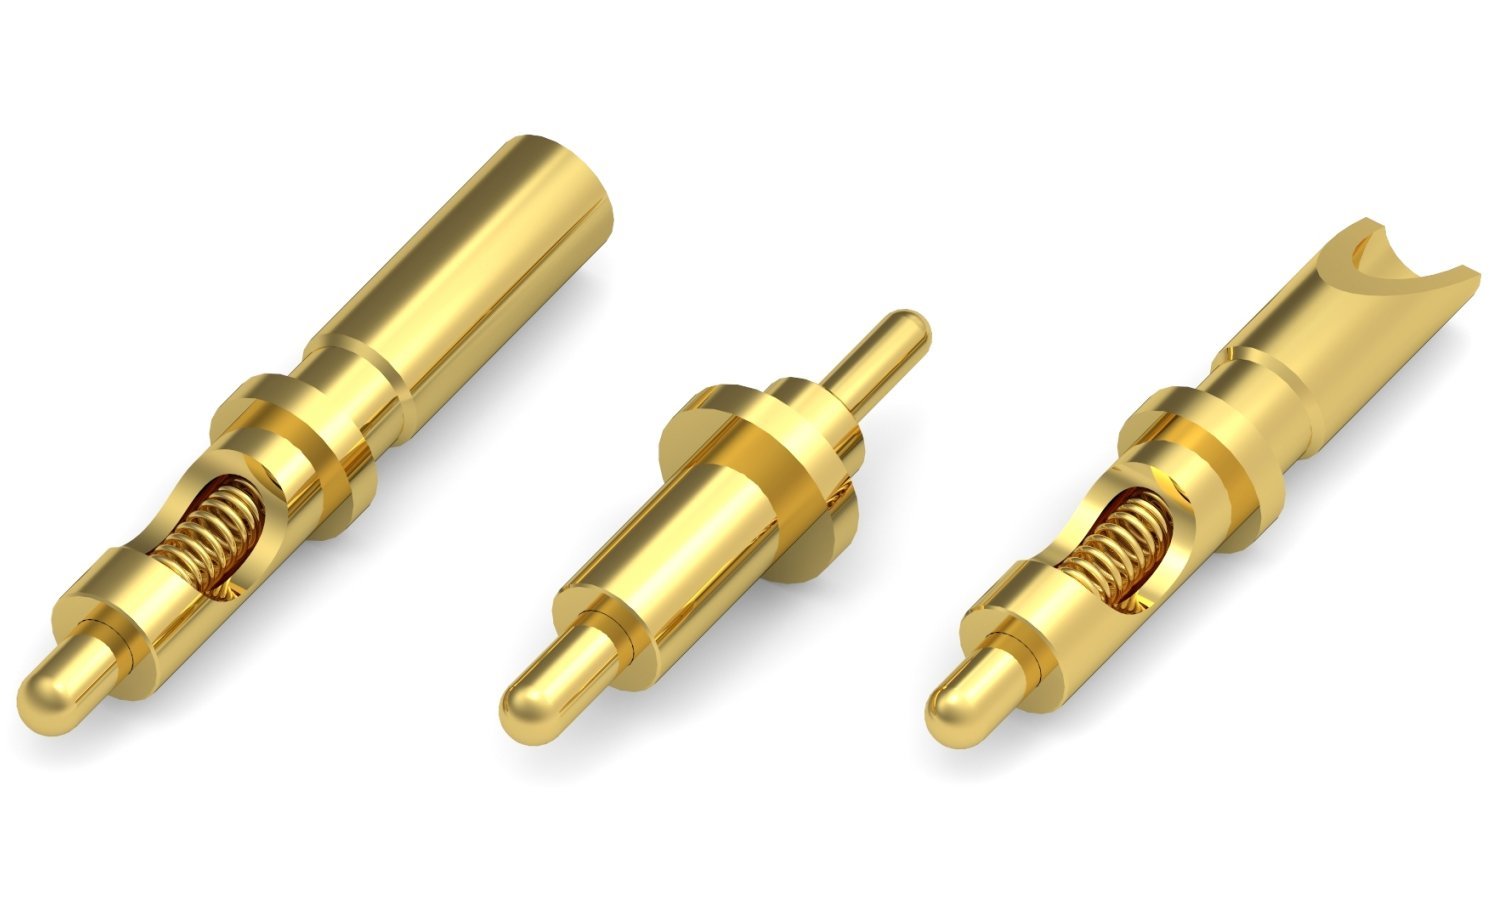 3 Additional Higher Current Spring Pins